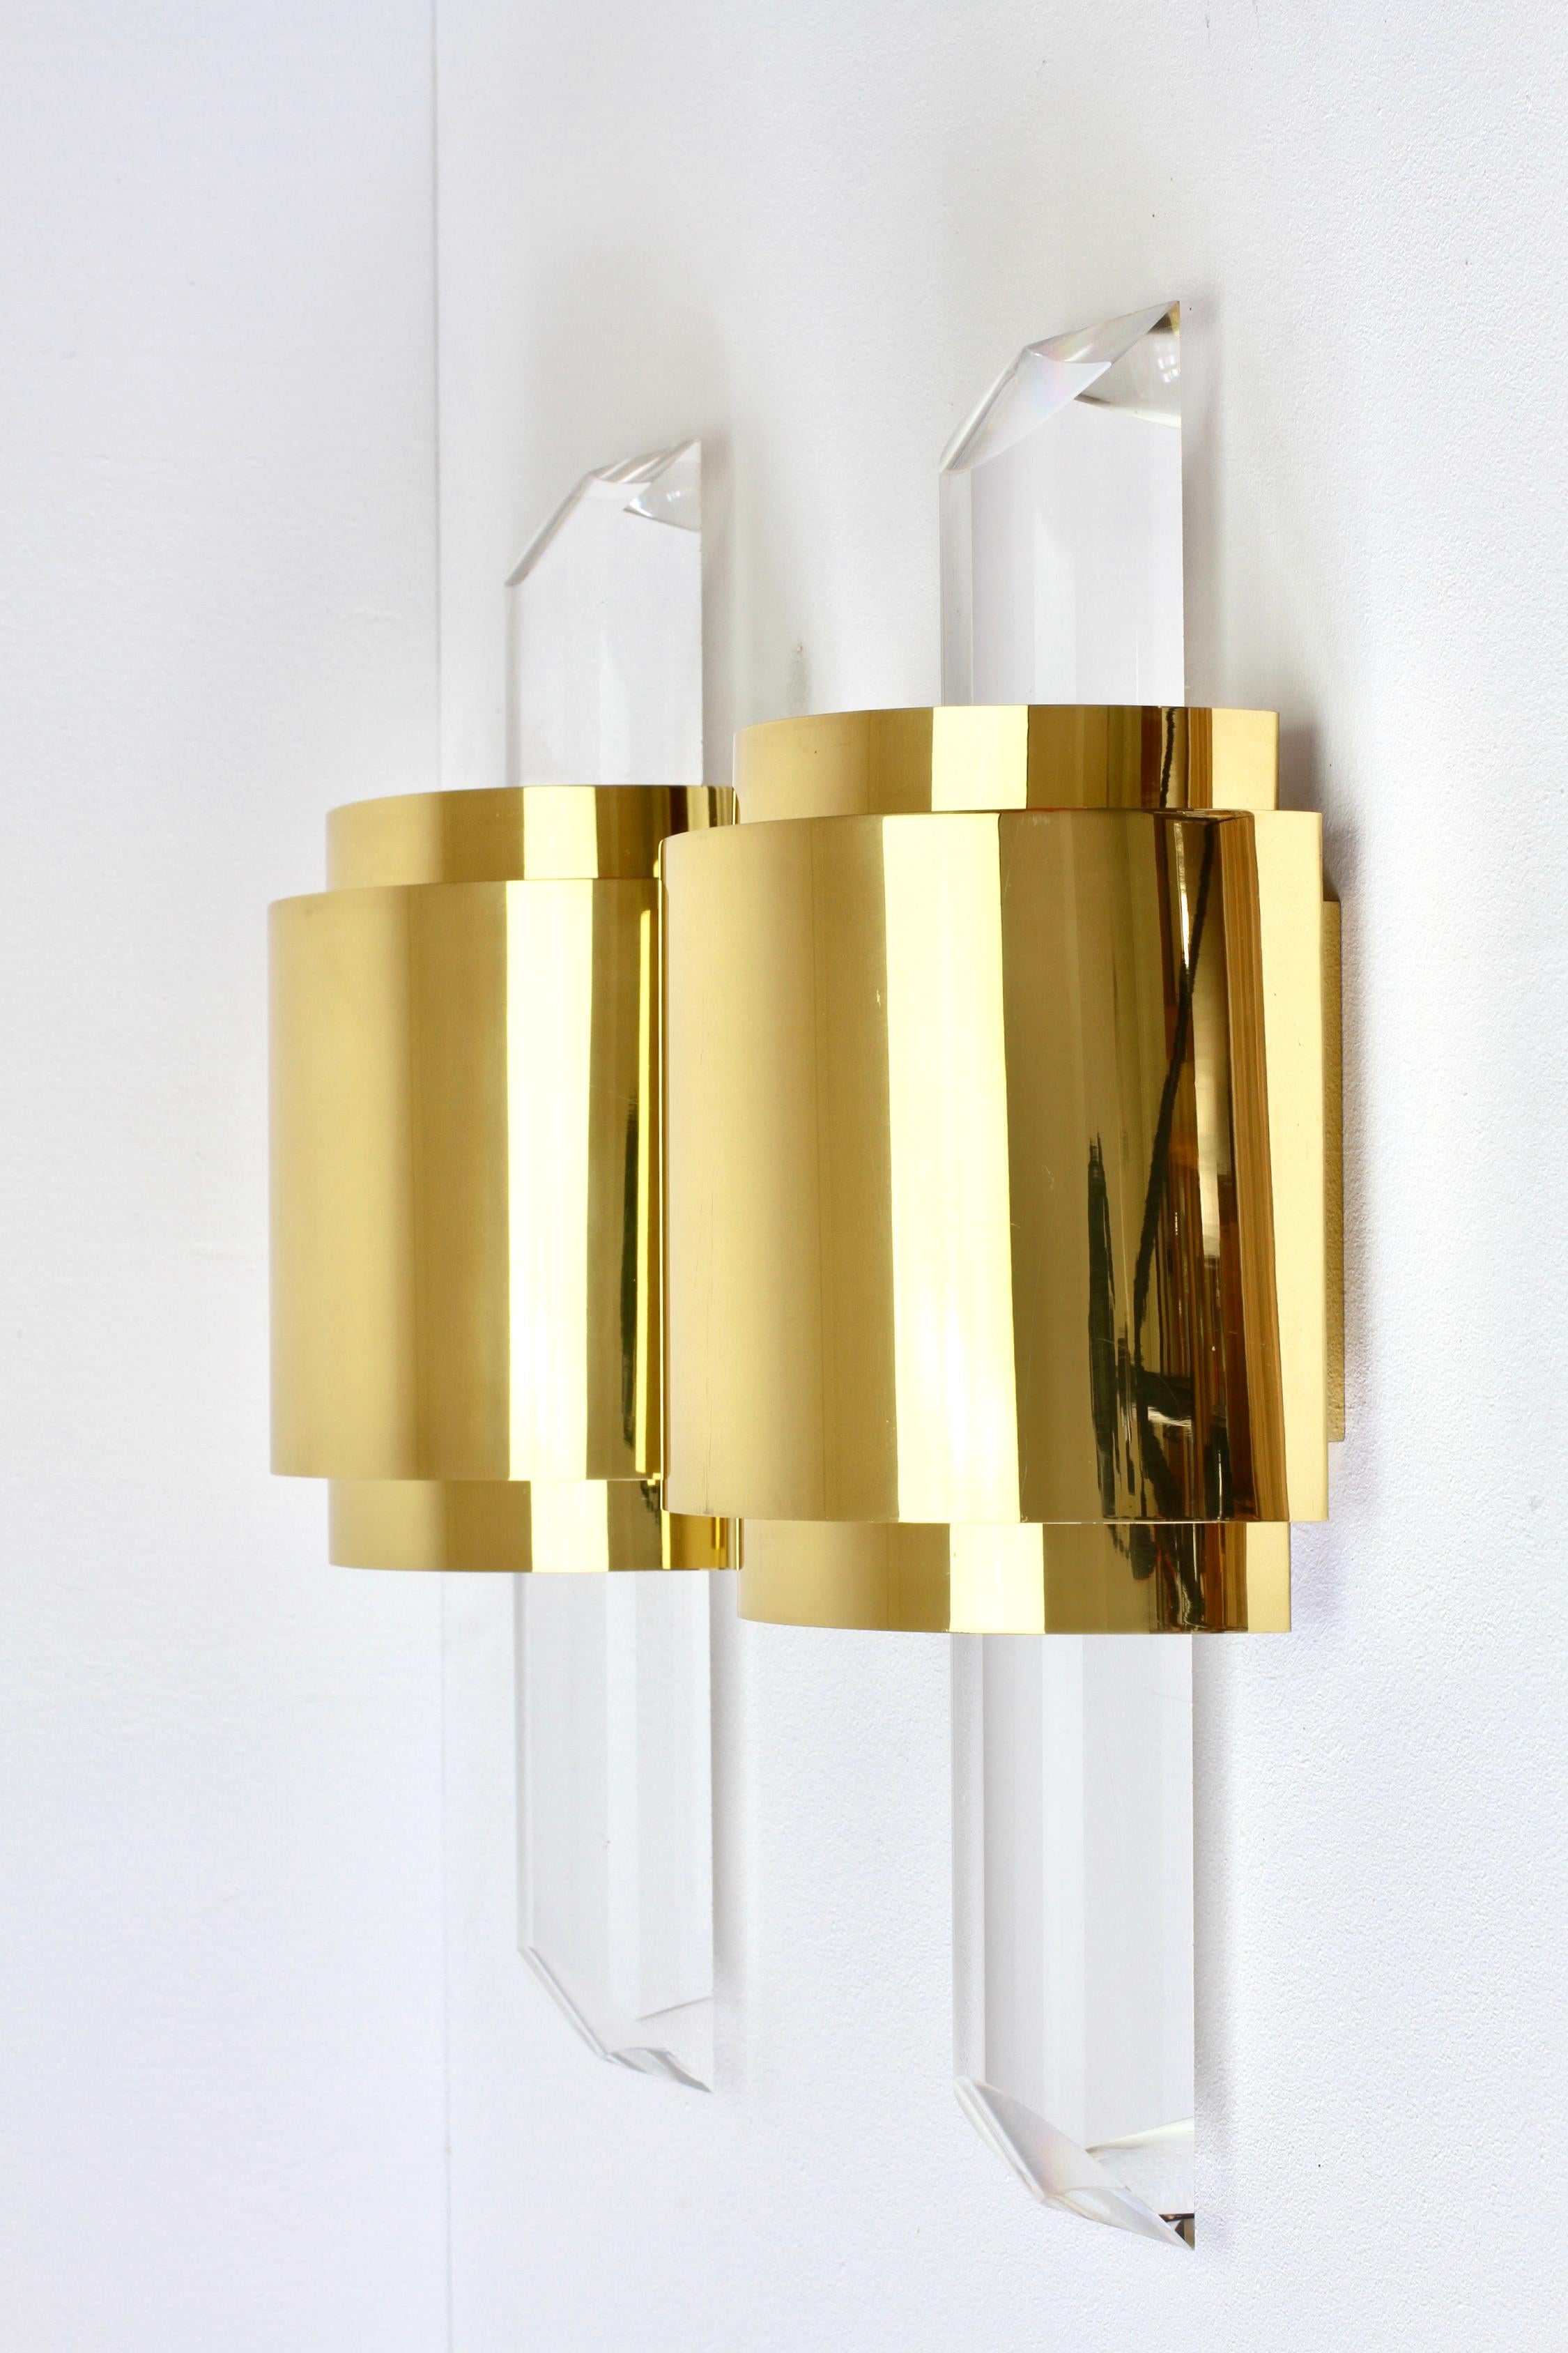 Large Hollywood Regency Lucite and Brass Wall Lights or Sconces, circa 1970s For Sale 4